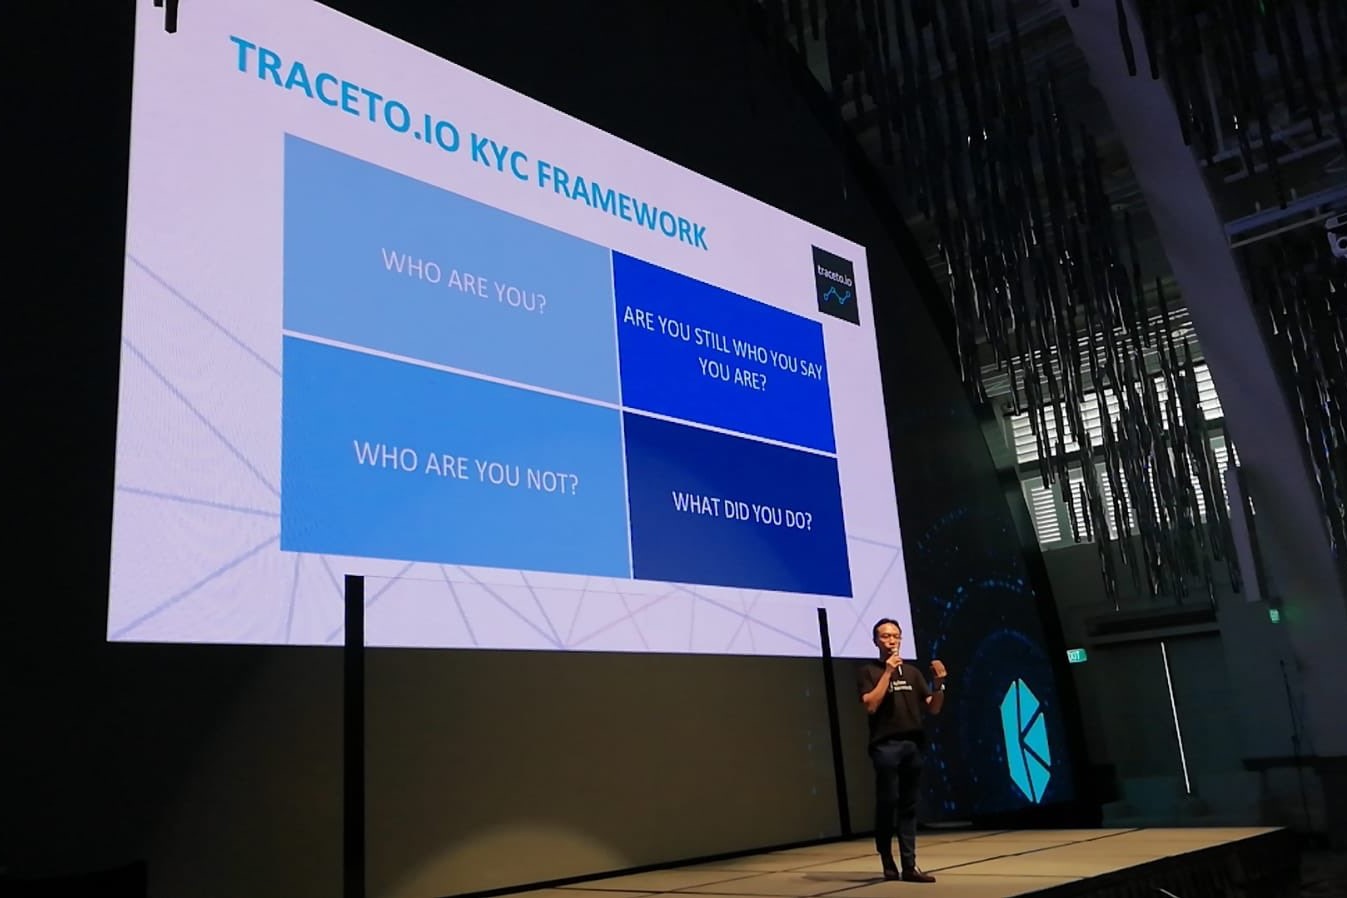 Traceto.io Aims to Solve the KYC Problem